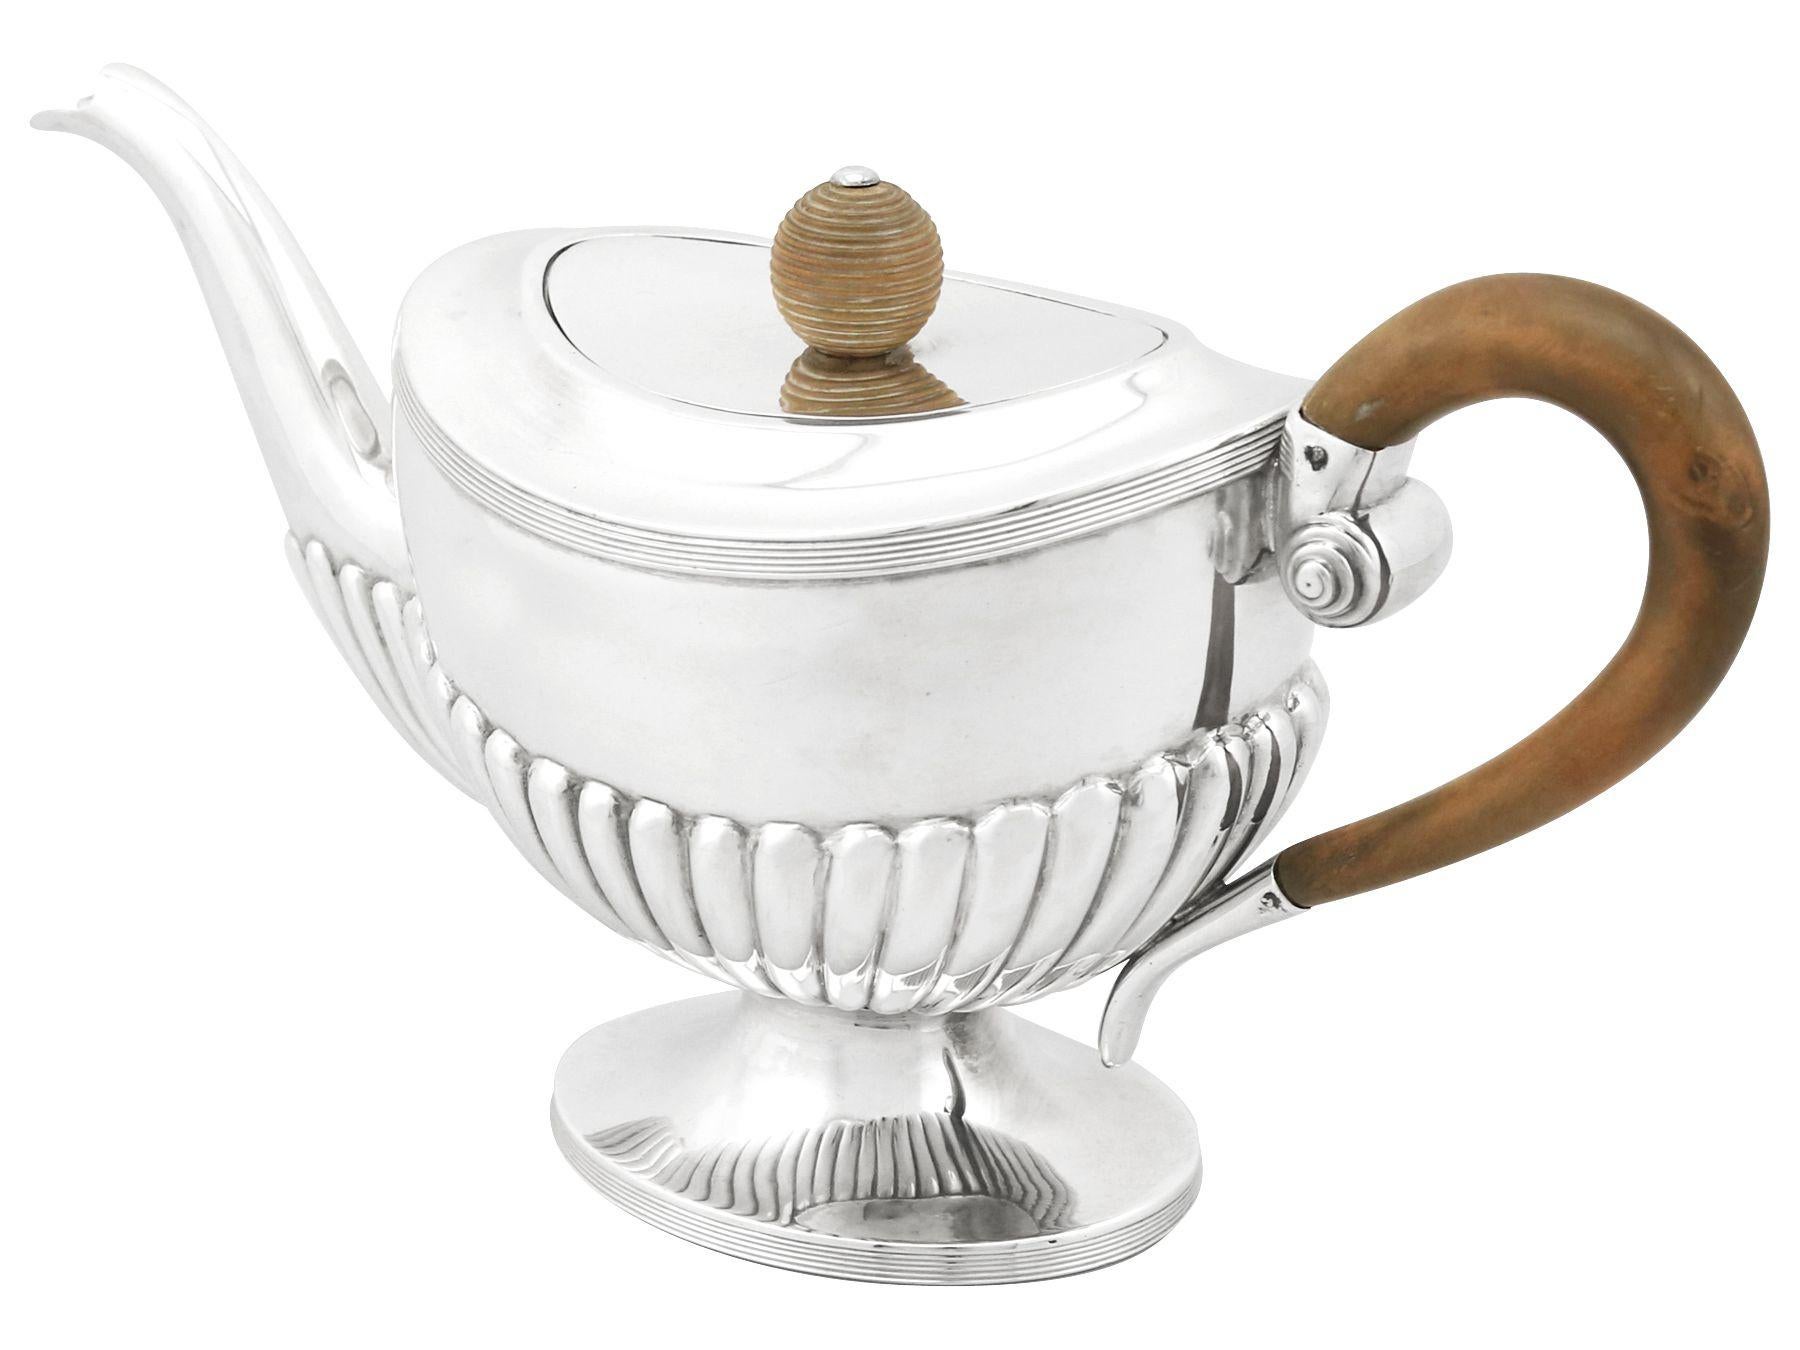 Antique 1829 Dutch Silver Teapot In Excellent Condition For Sale In Jesmond, Newcastle Upon Tyne